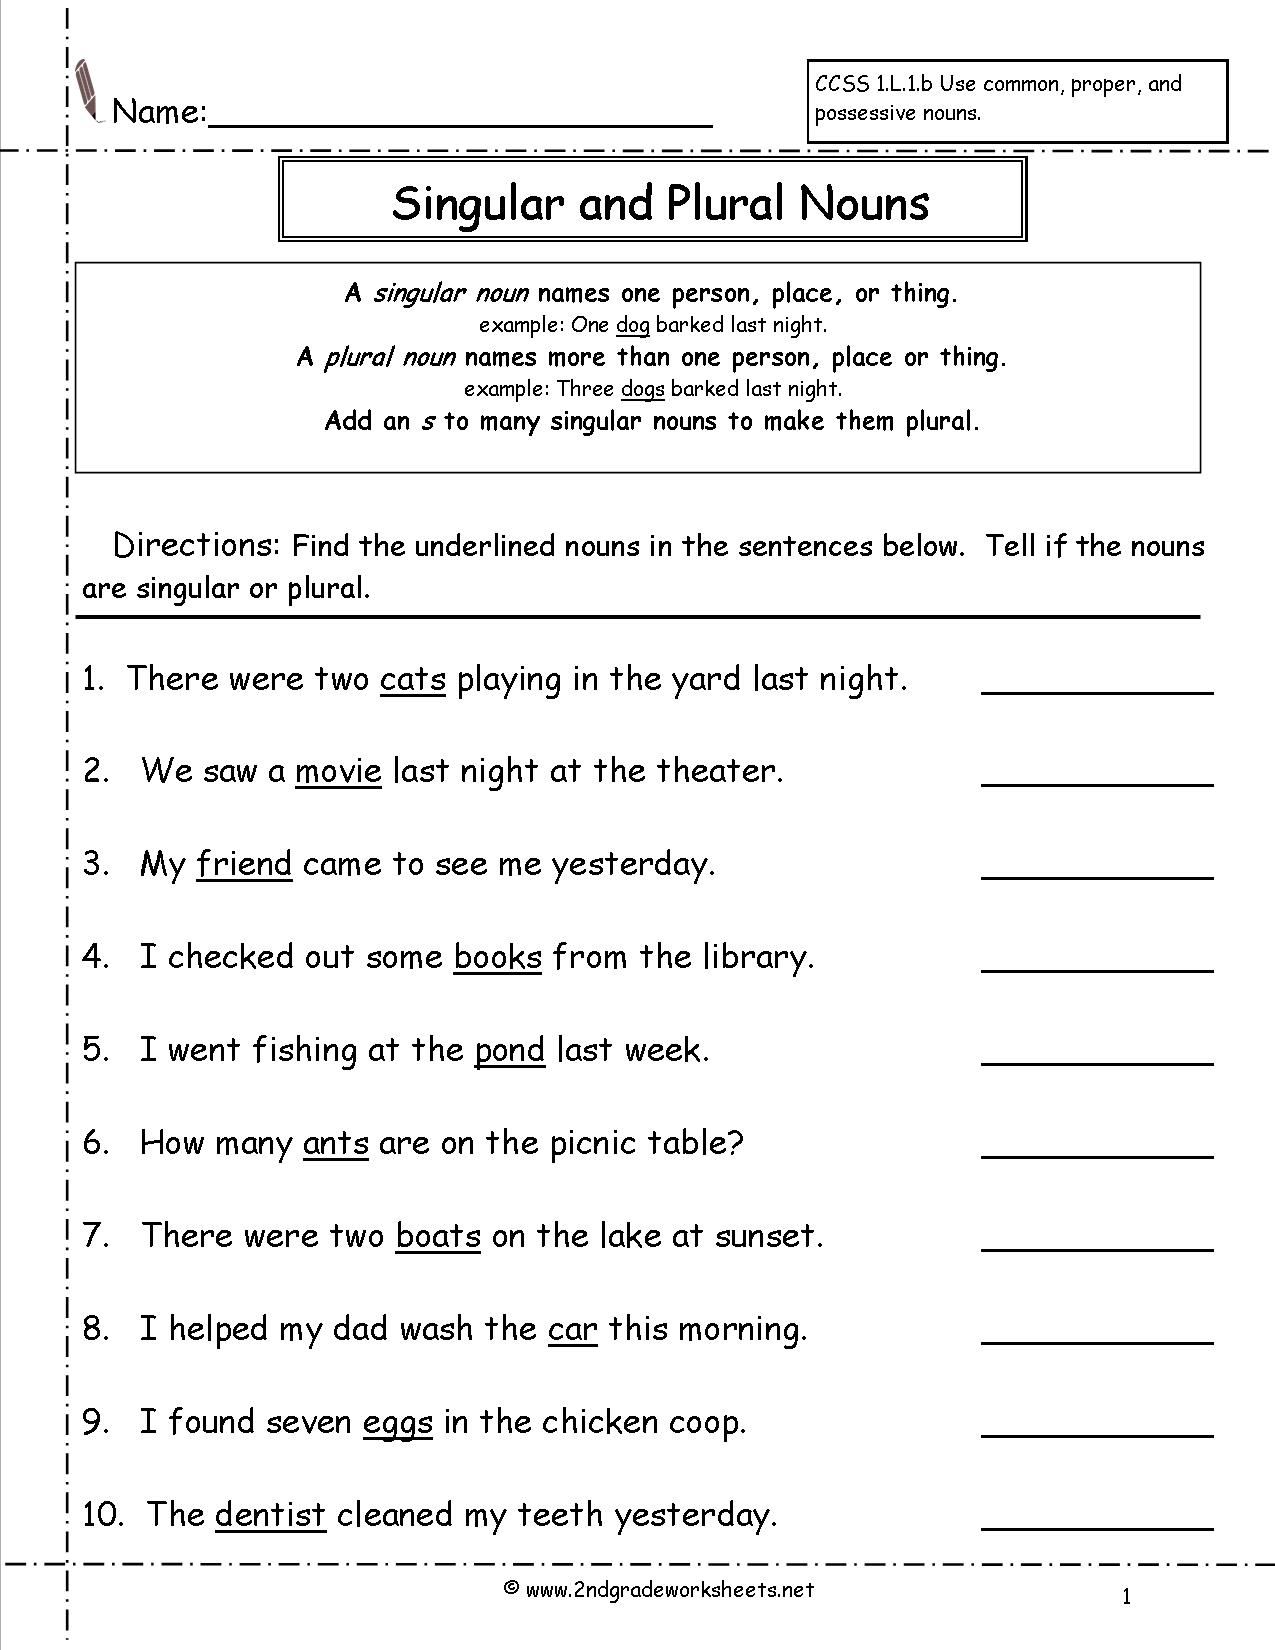 Singular Plural And Collective Nouns At The Zoo Worksheet Answers